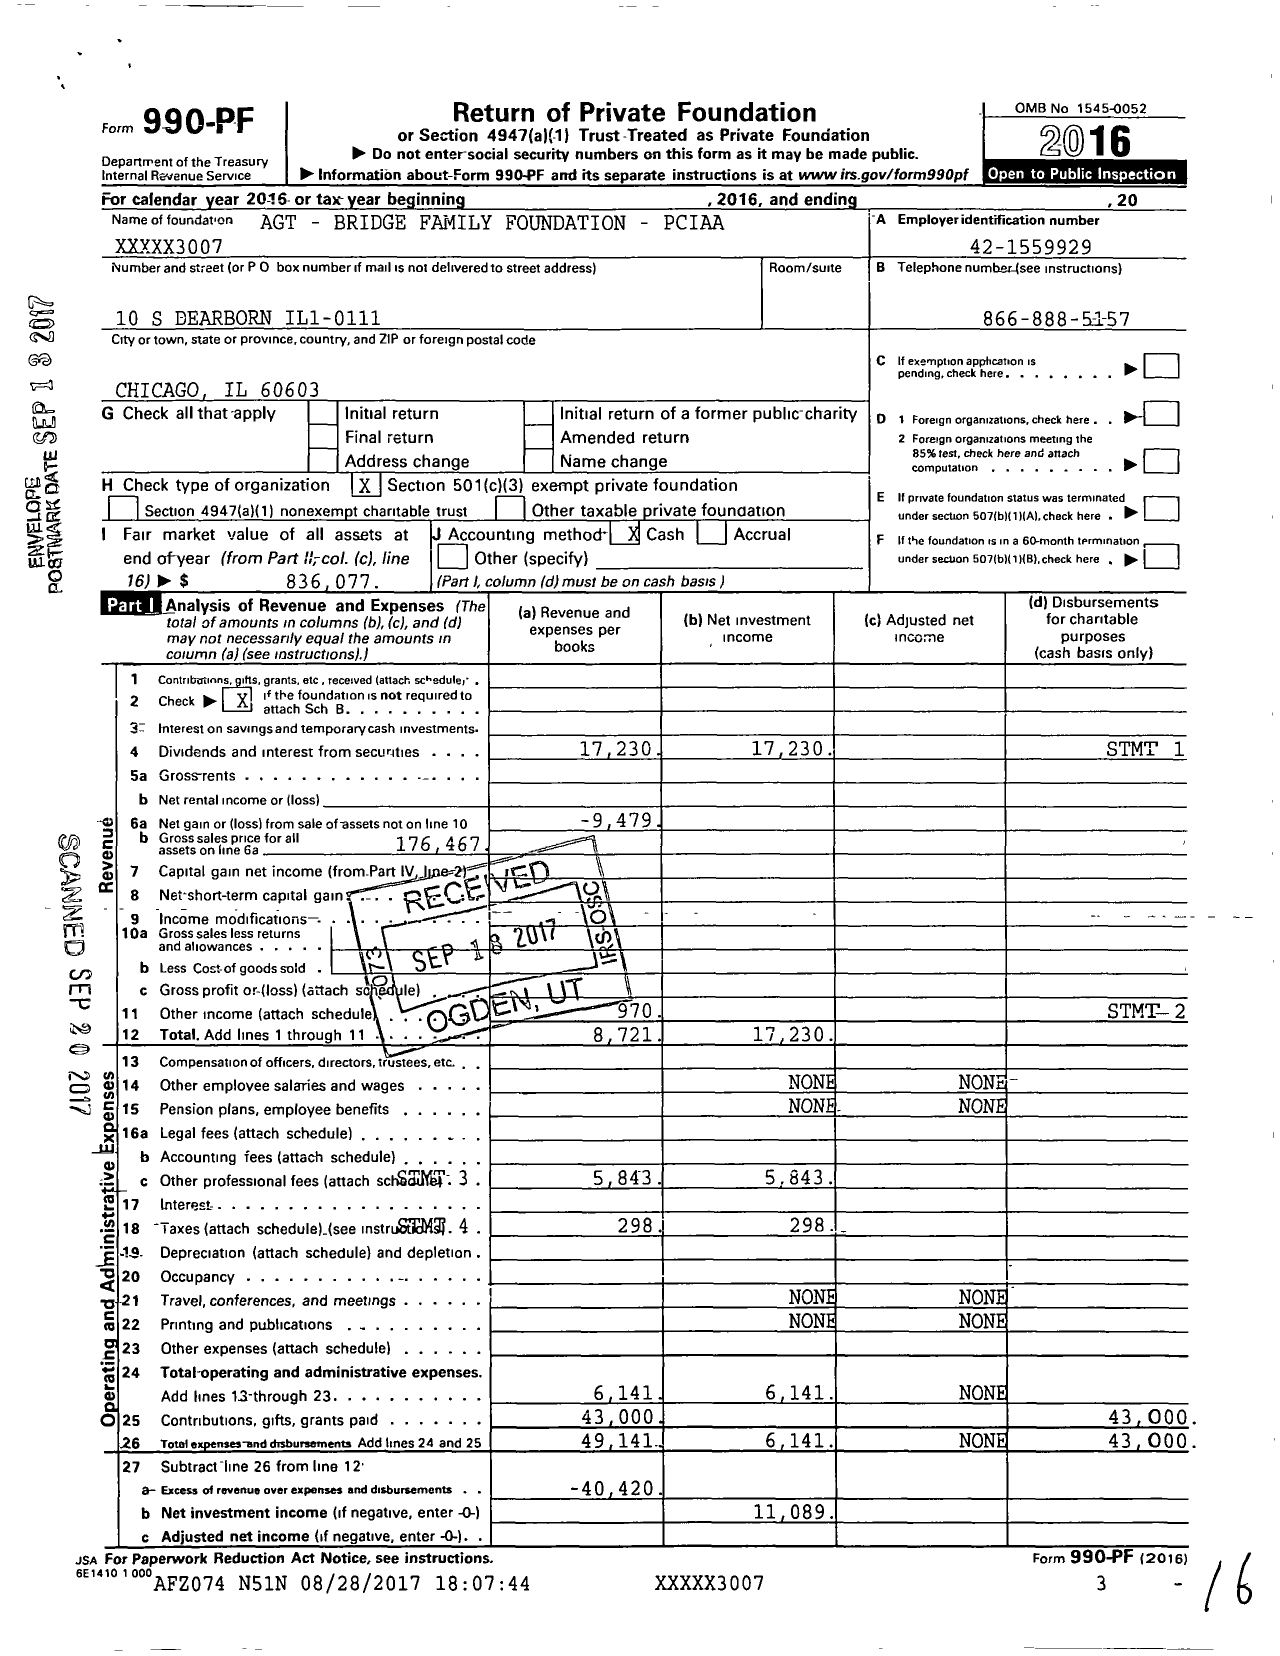 Image of first page of 2016 Form 990PF for Agt Bridge Family Foundation